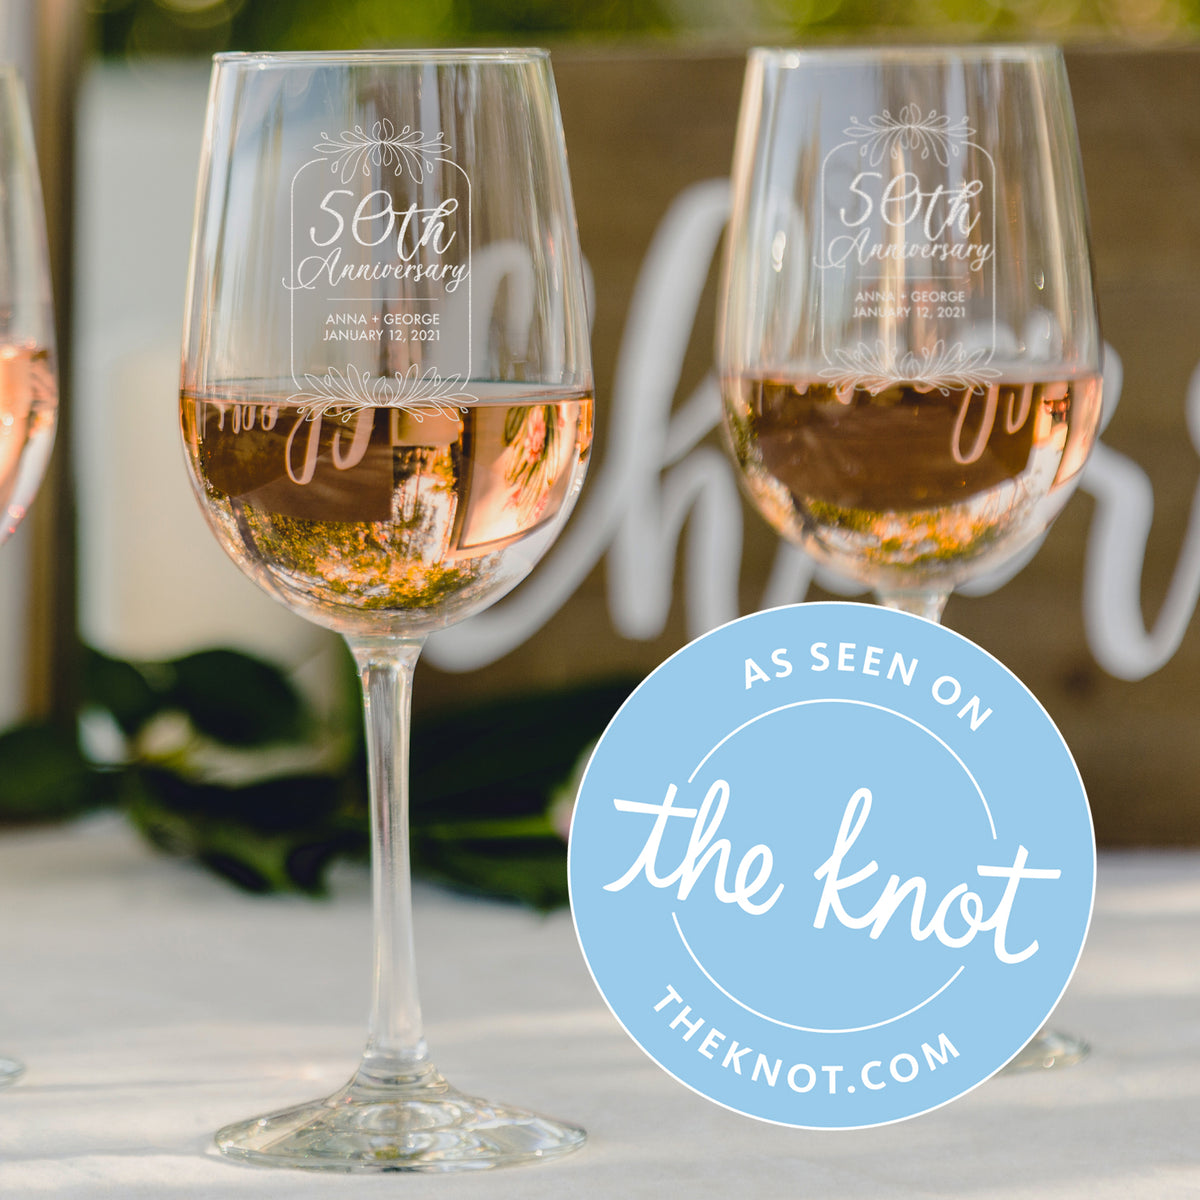 Classic Monogrammed Wine Glasses Set of 4 Size One Size